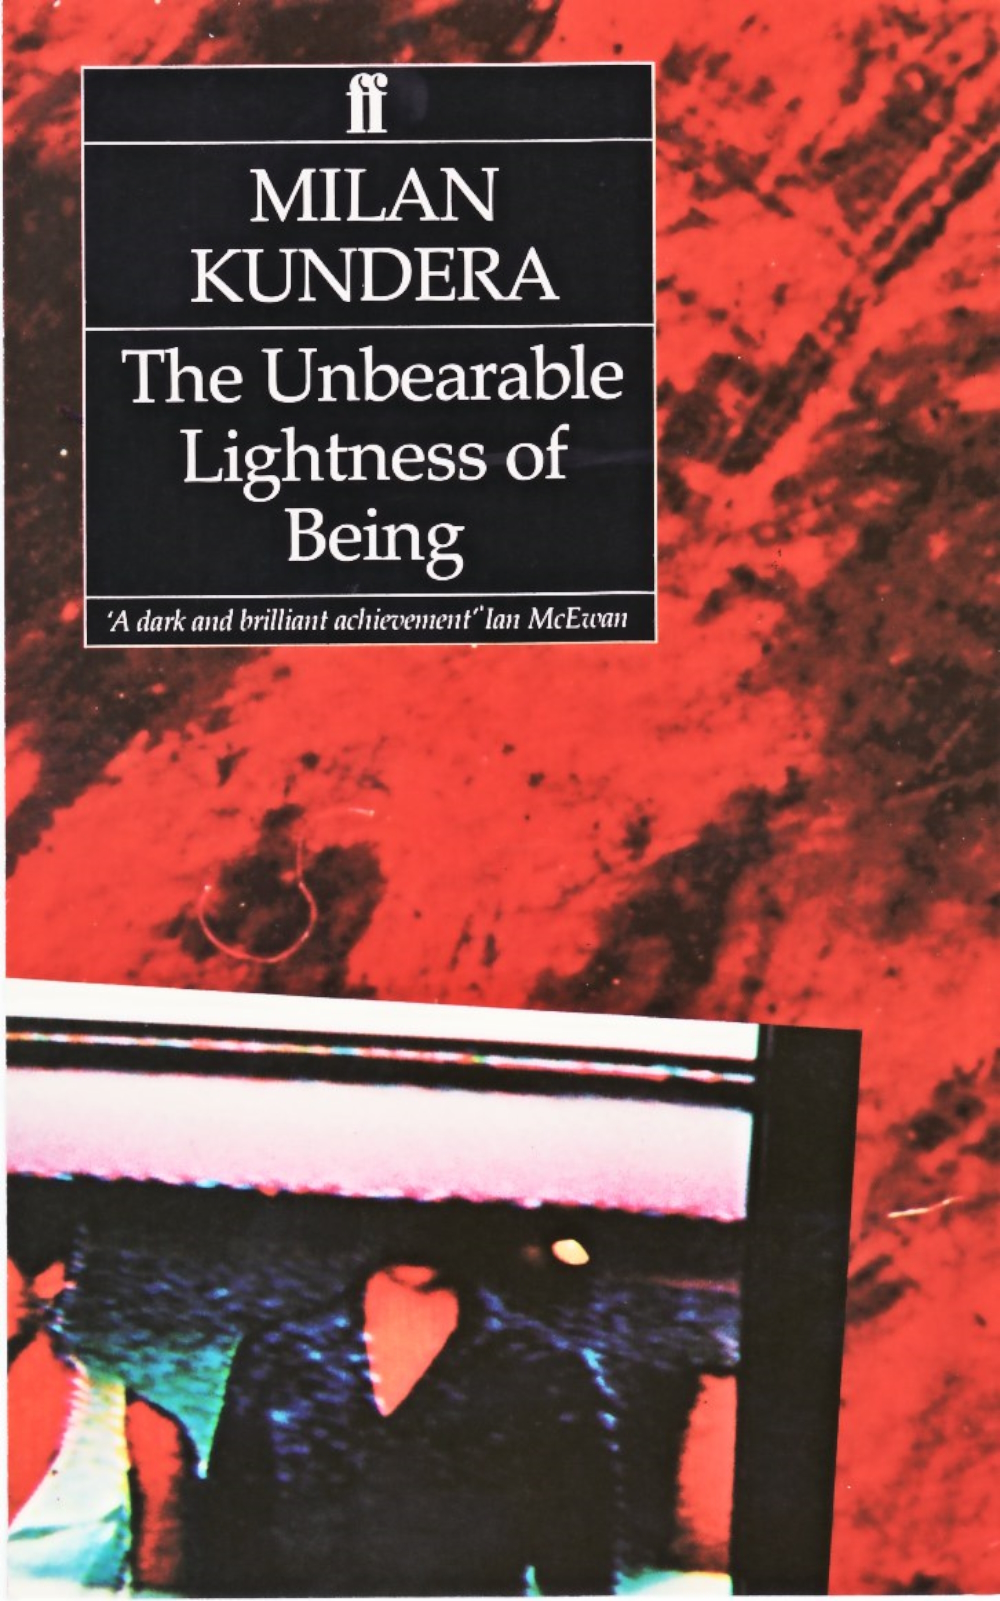 Cover design for a bestselling modern classic, the first UK edition of Milan Kundera's 'The Unbearable Lightness of Being'.